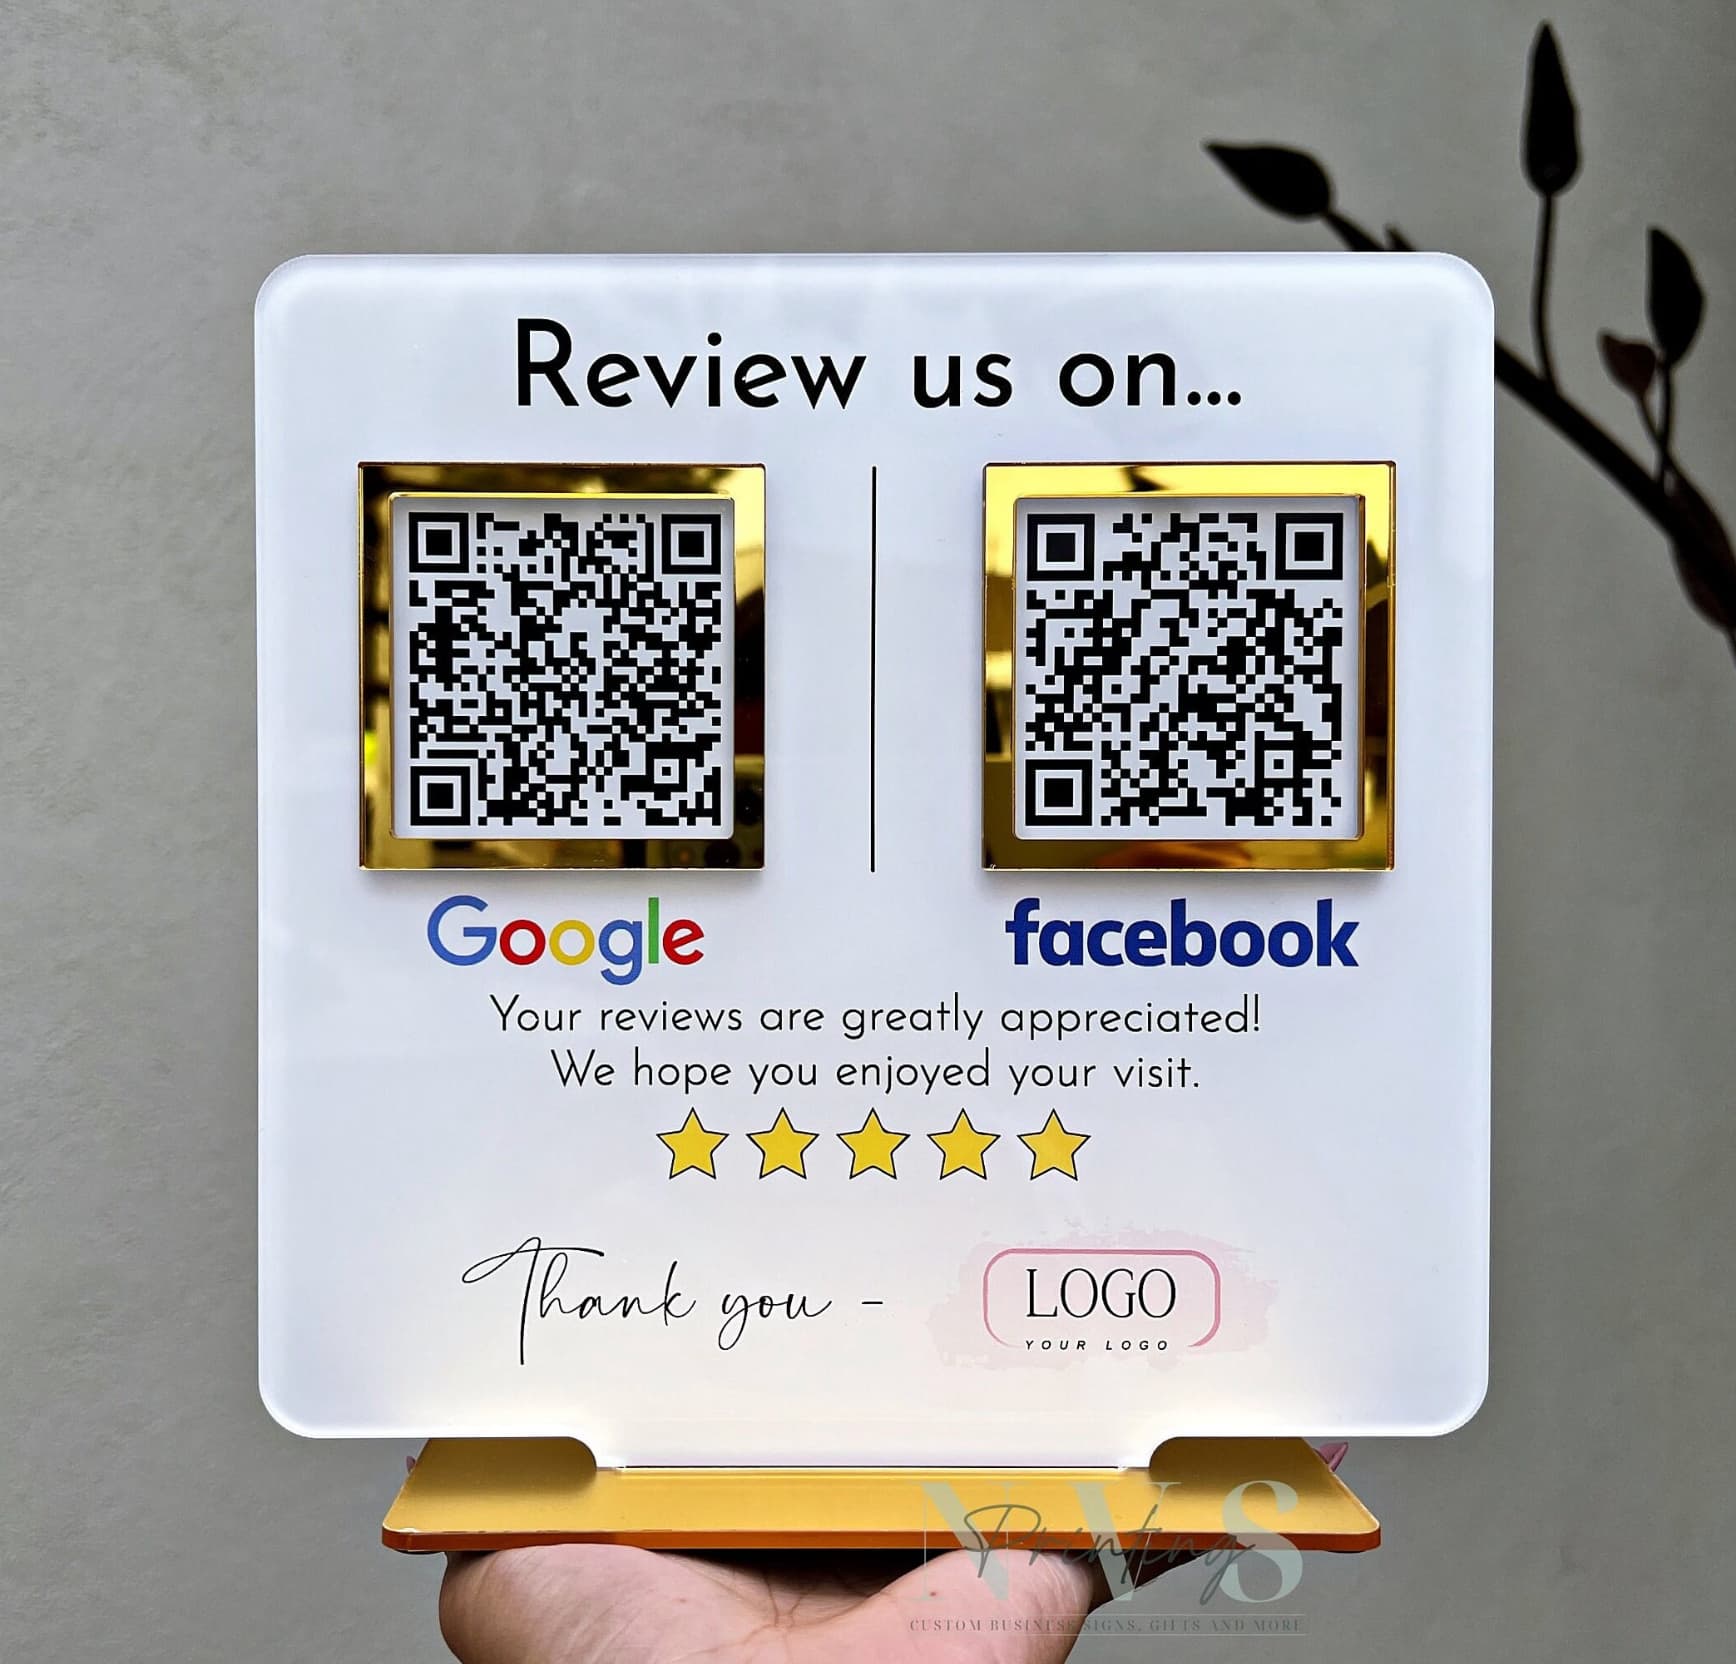 qr code reviews use cases for google and facebok